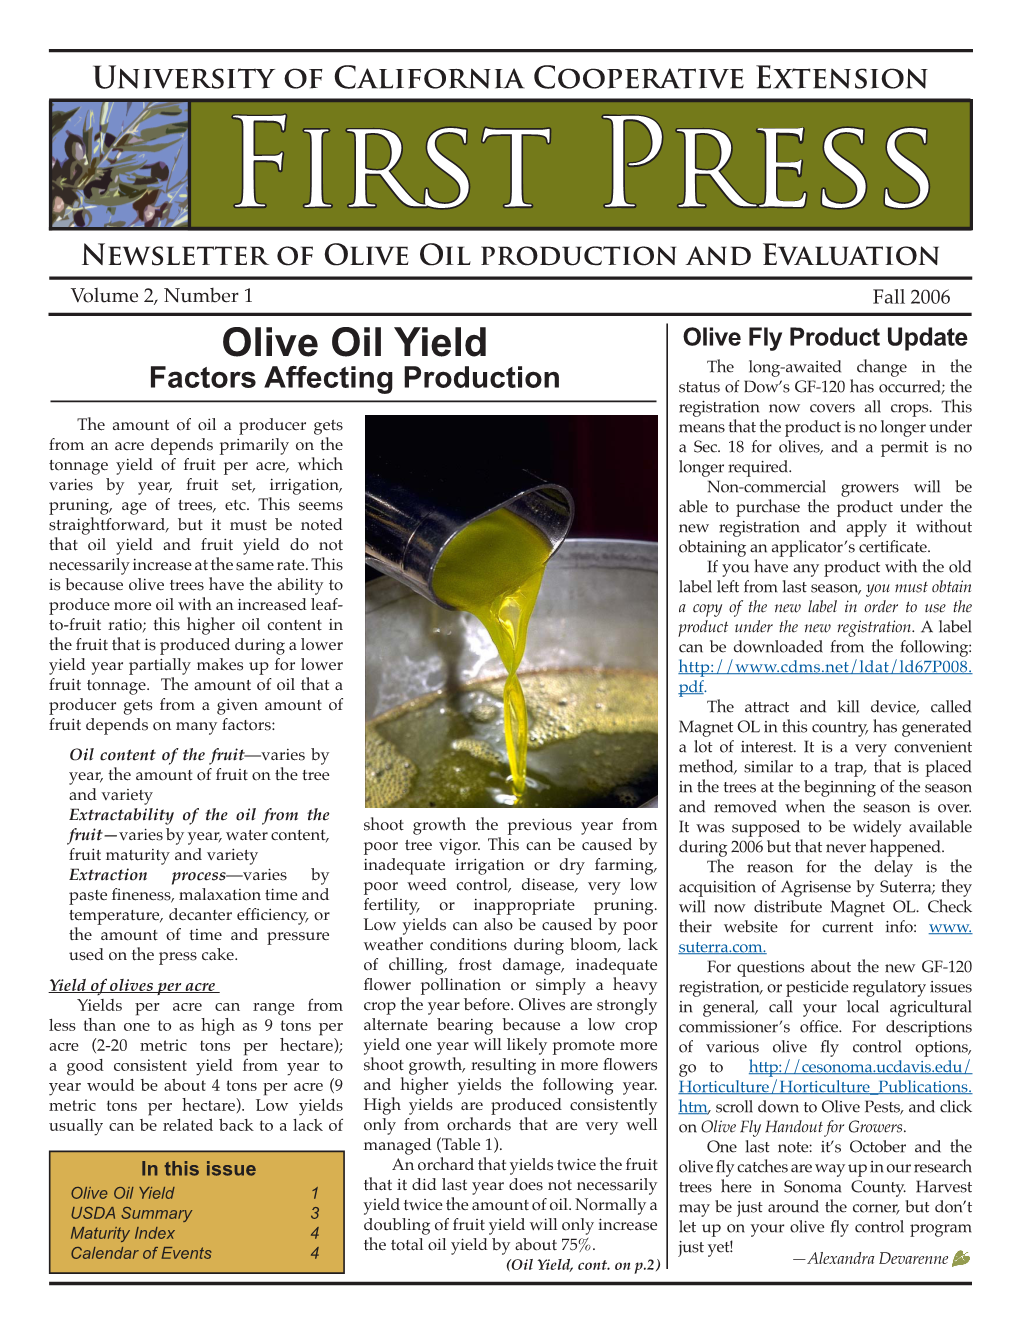 Olive Oil Yield